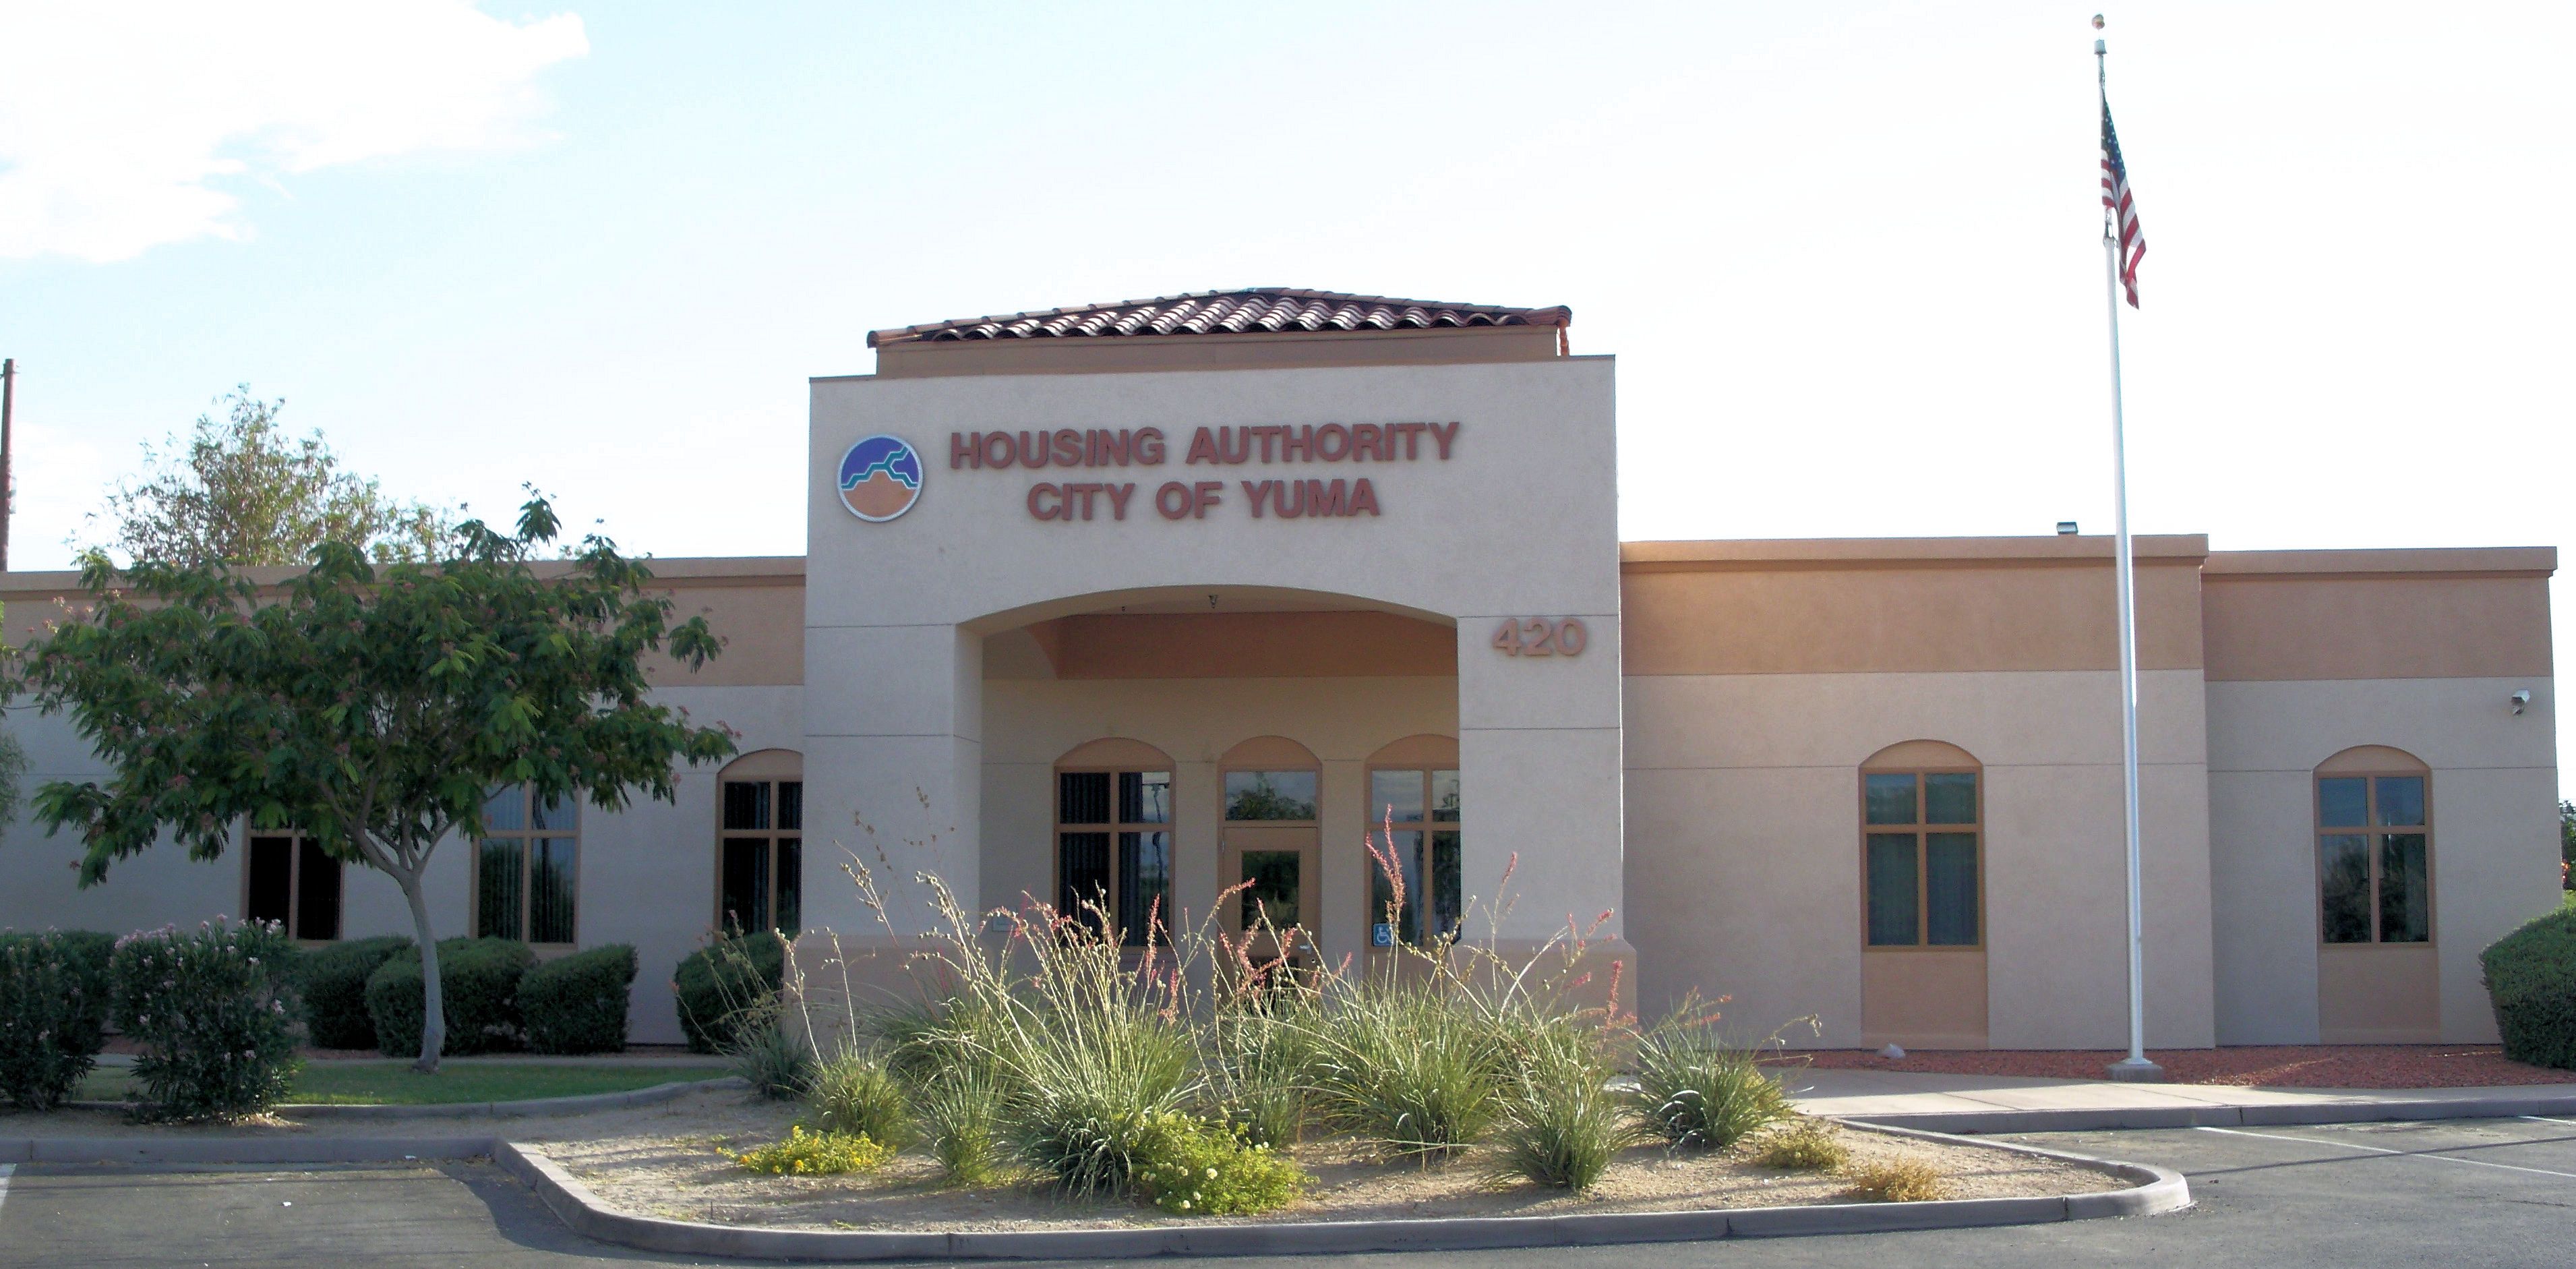 Housing Authority of the City of Yuma